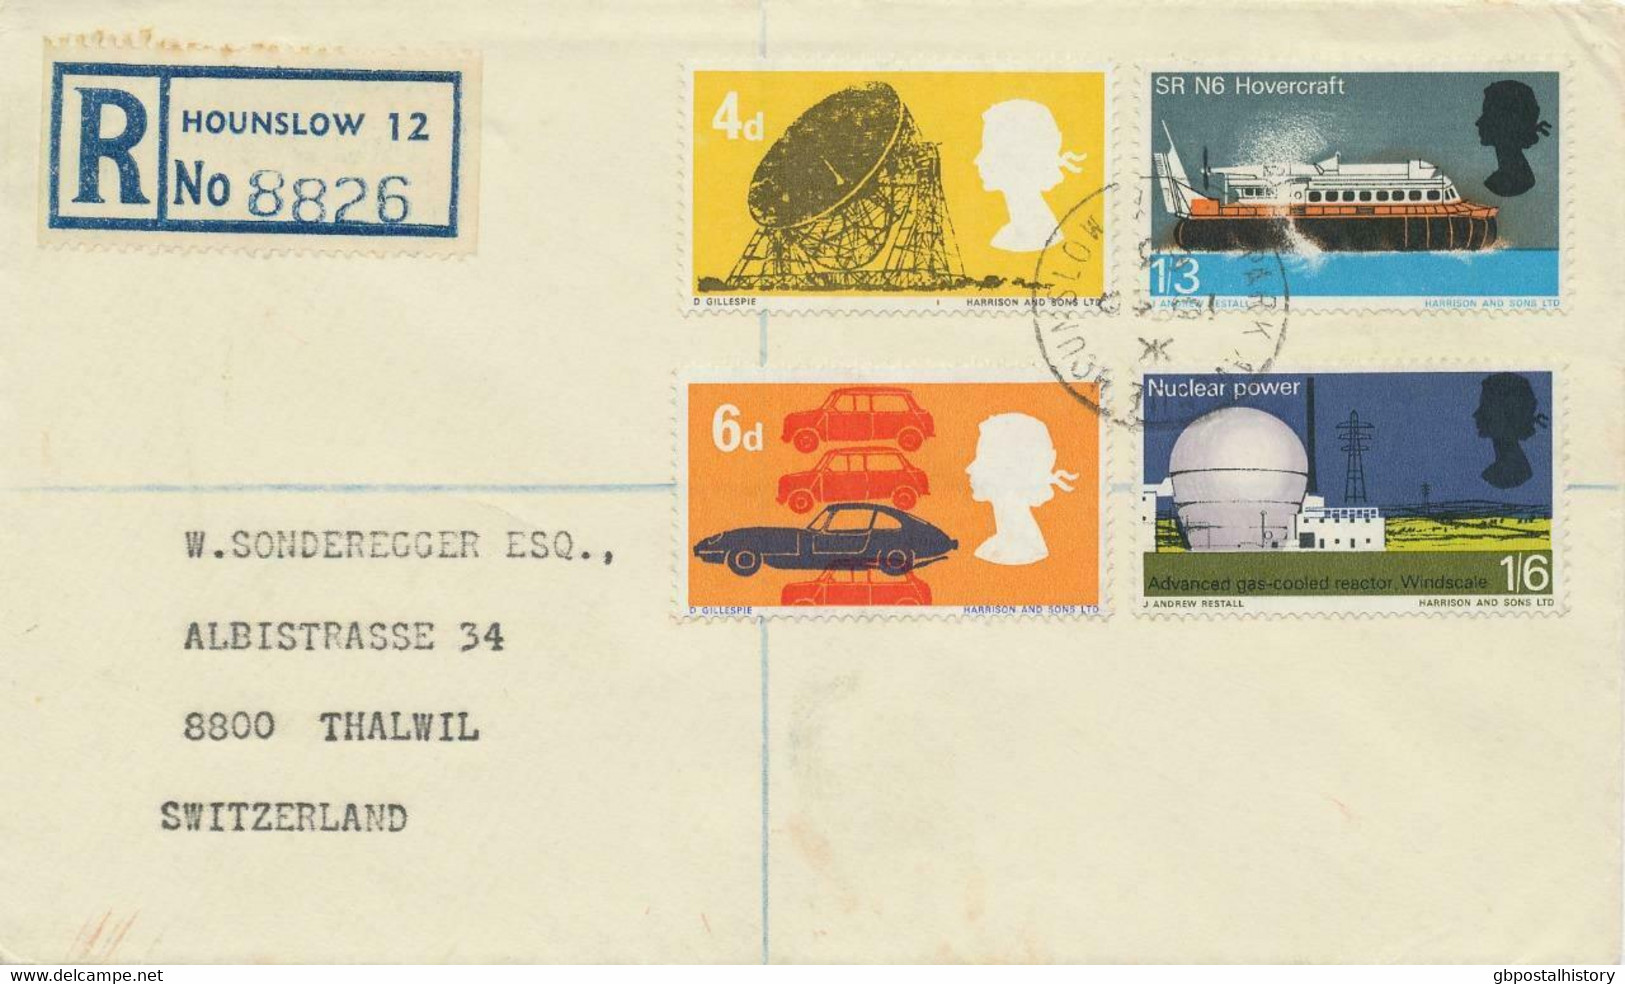 GB 1967, British Discovery And Invention On Very Fine R-FDC With R-Label Hounslow 12 To Switzerland With Small CDS Of - 1952-1971 Pre-Decimal Issues